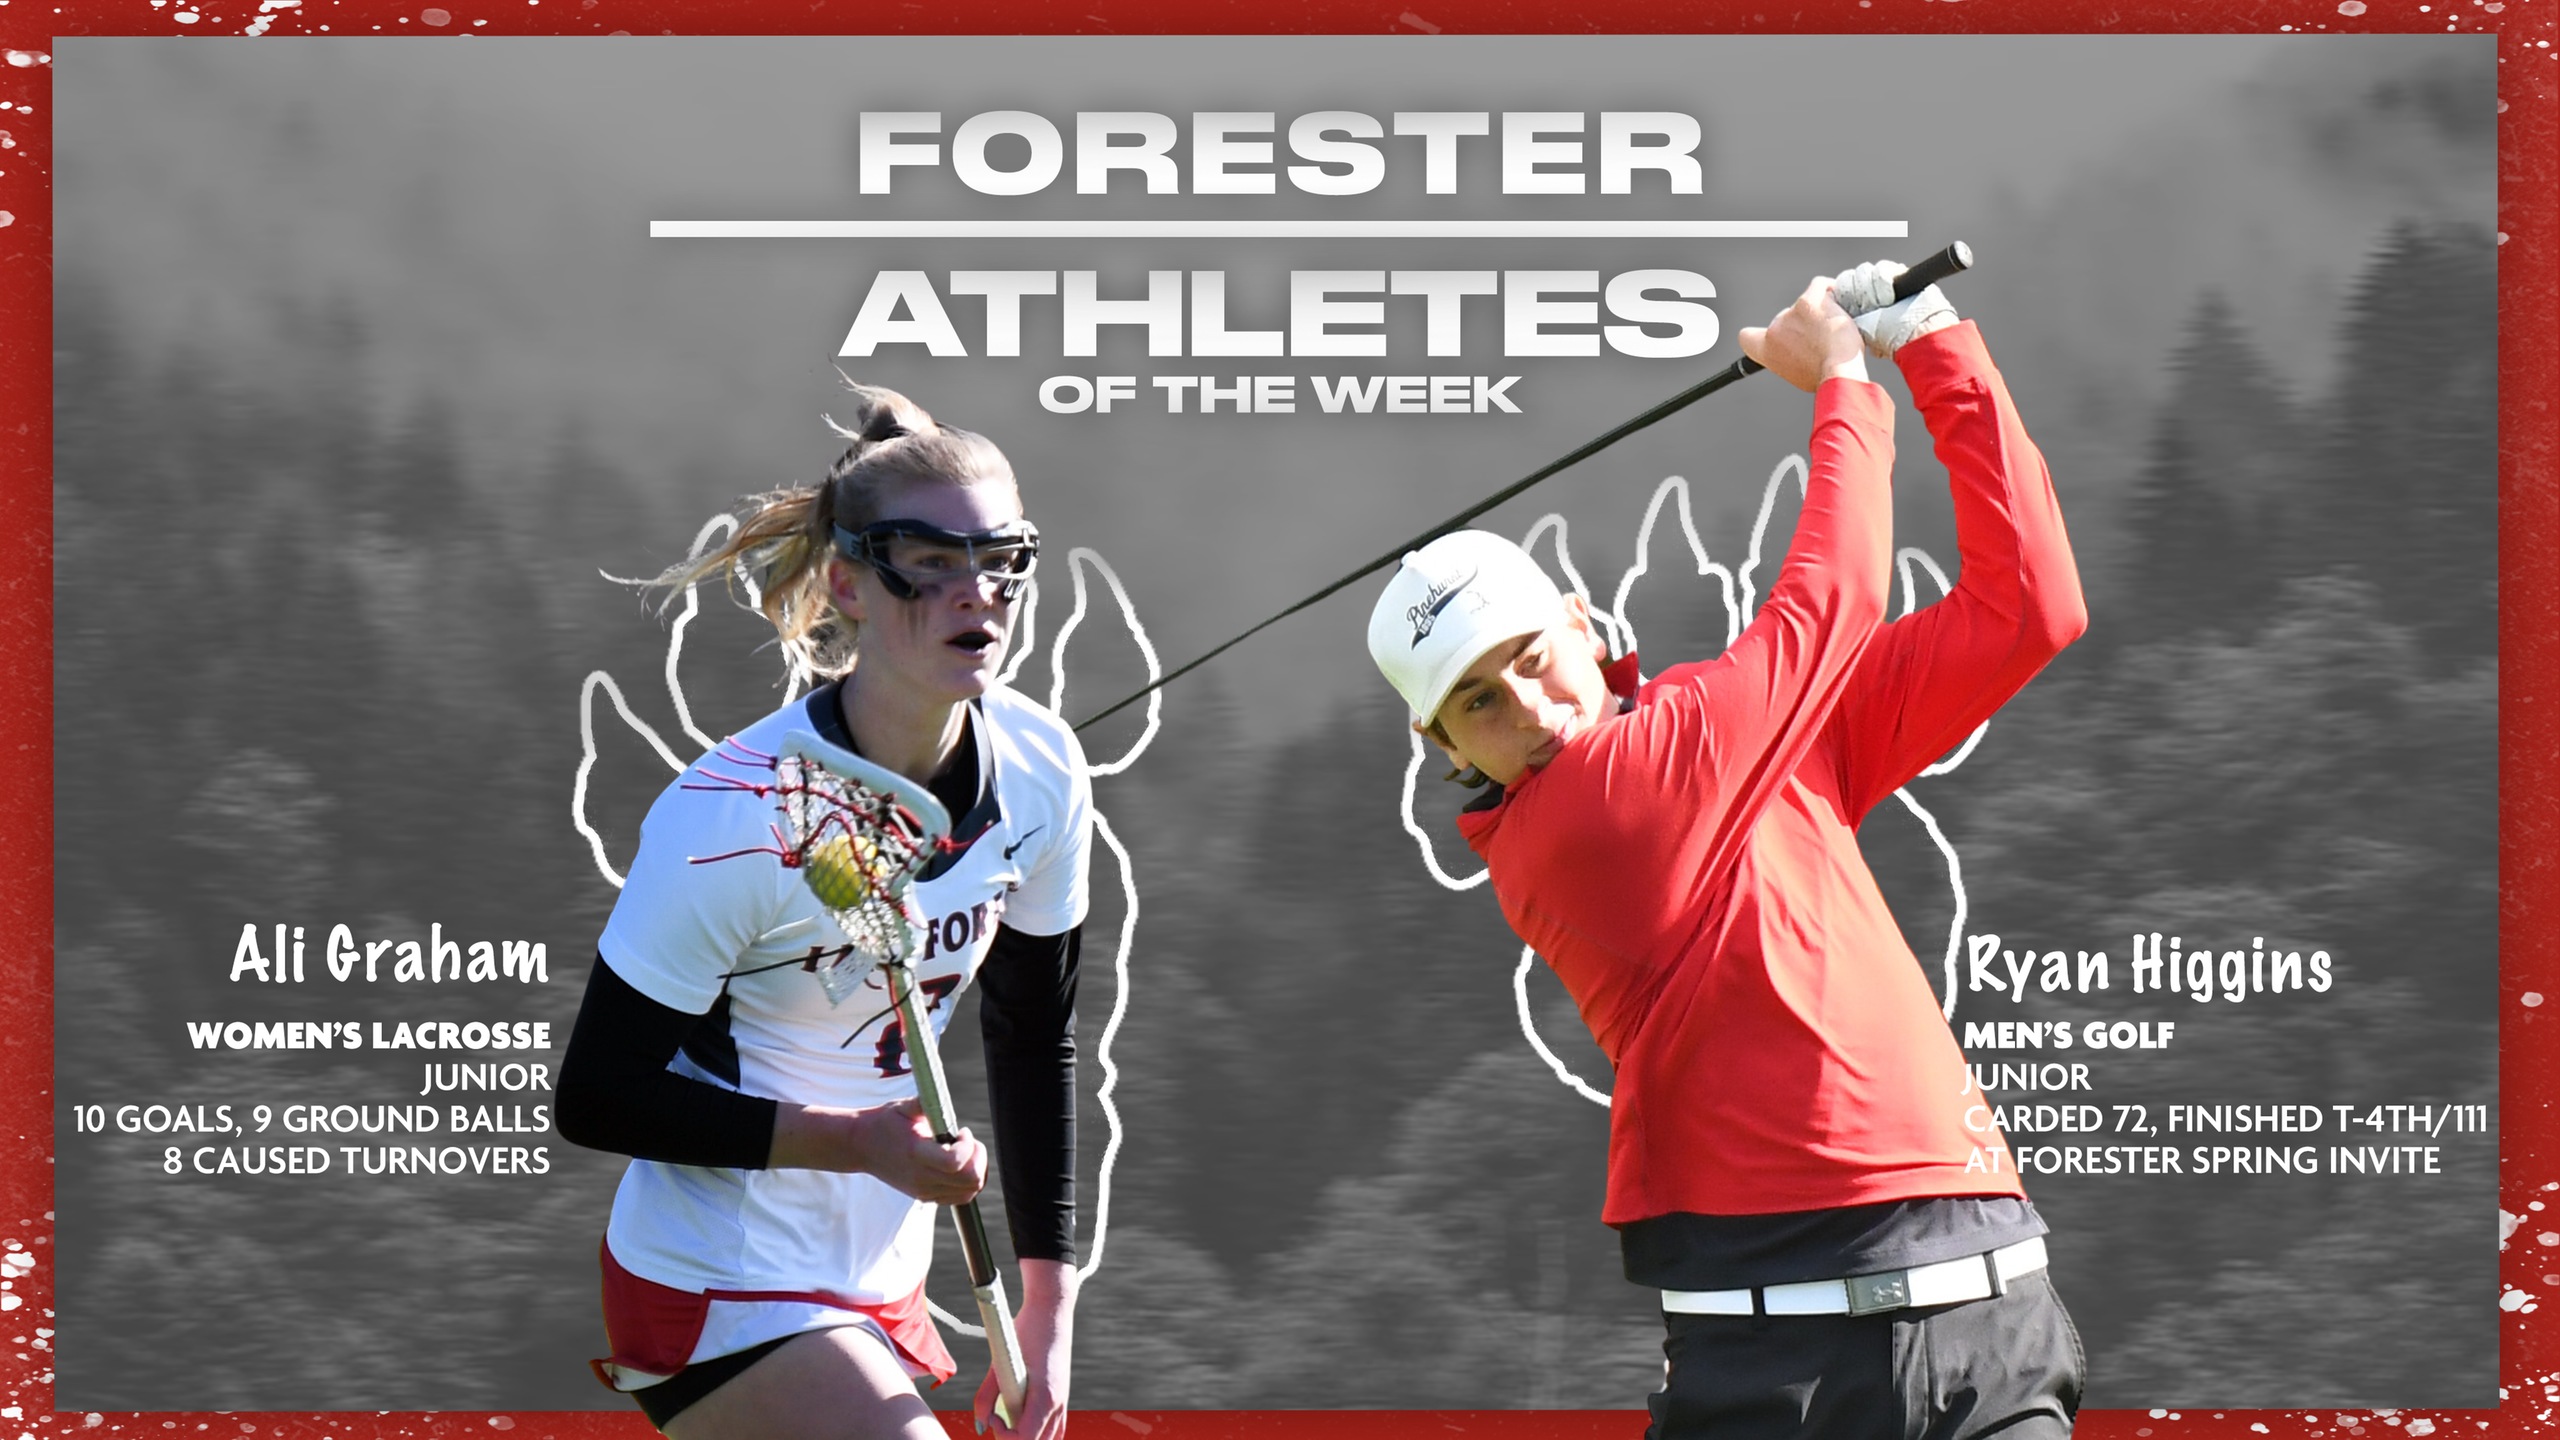 Forester Athletes of the Week: April 18